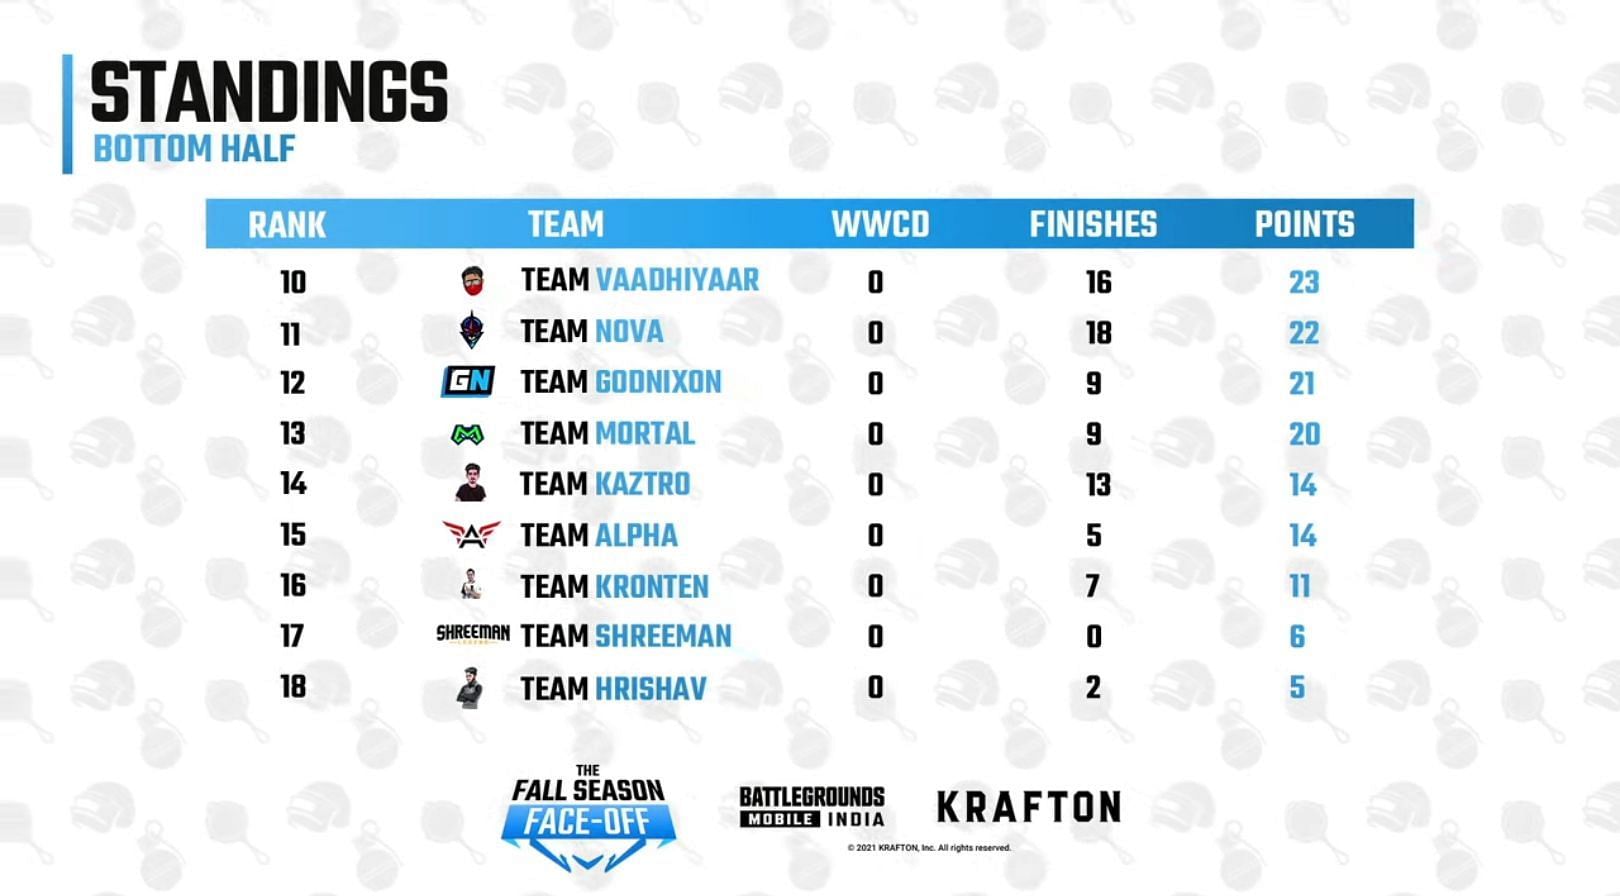 Team Mortal finished in 13th position (Image via BGMI YouTube)